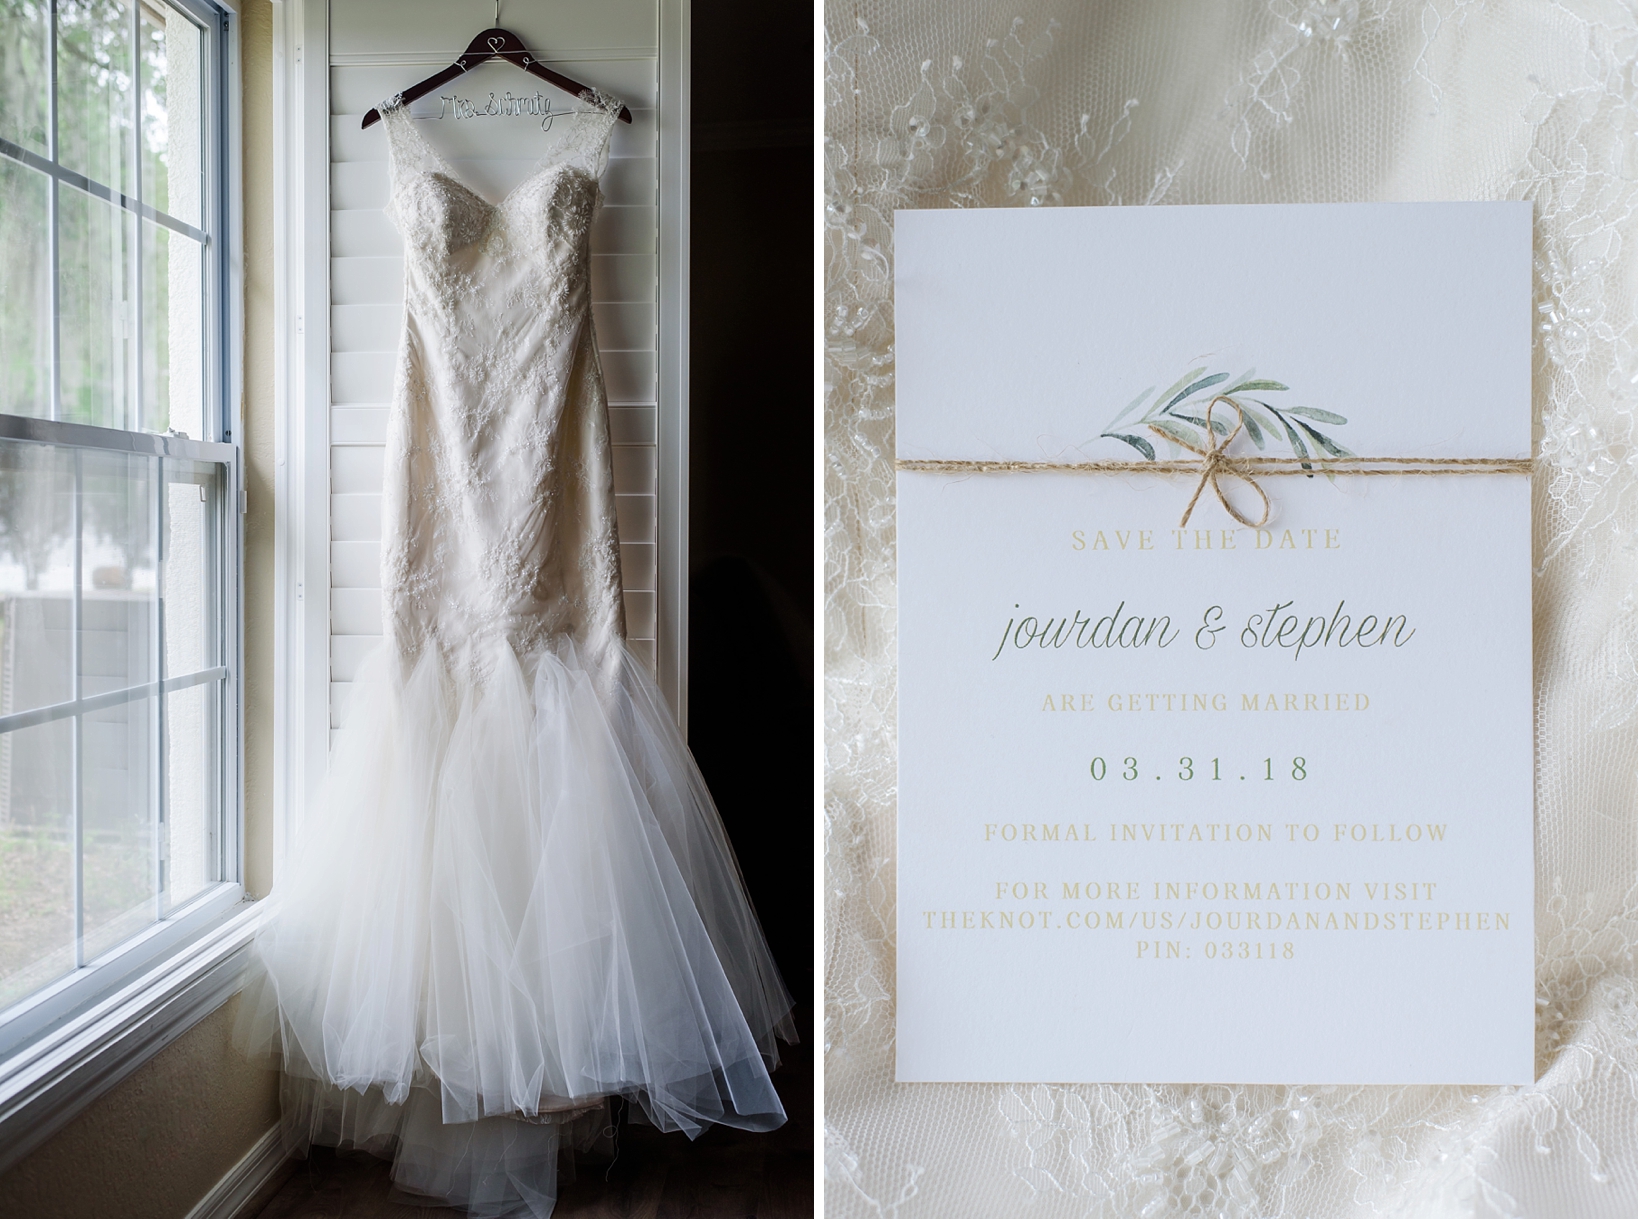 Brides mermaid cut dress and wedding invitation against the lace details of the dress